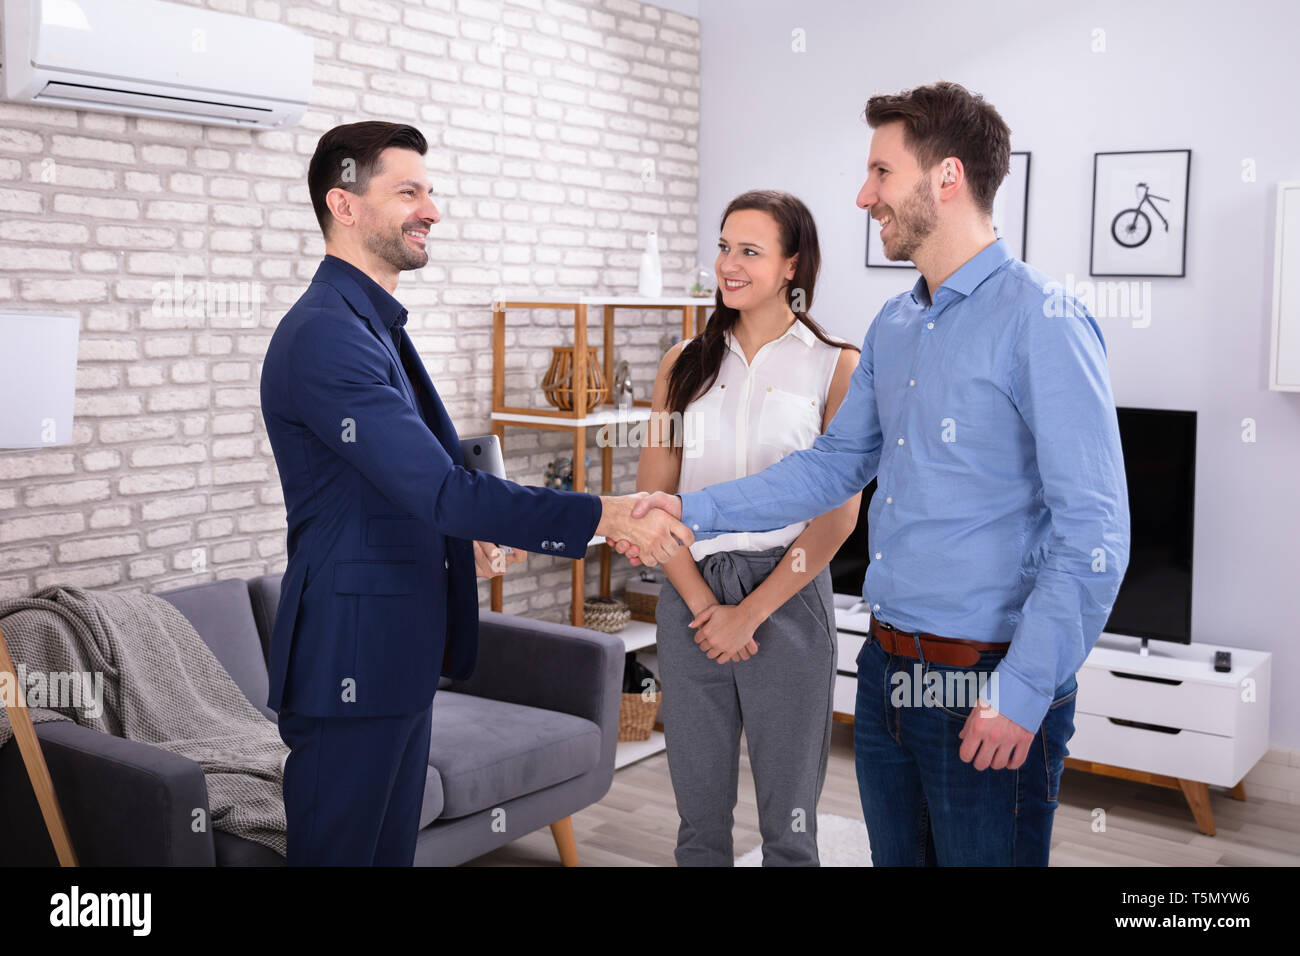 Smiling Male Real Estate Agent Shaking Hands With His Clients In New Home Stock Photo